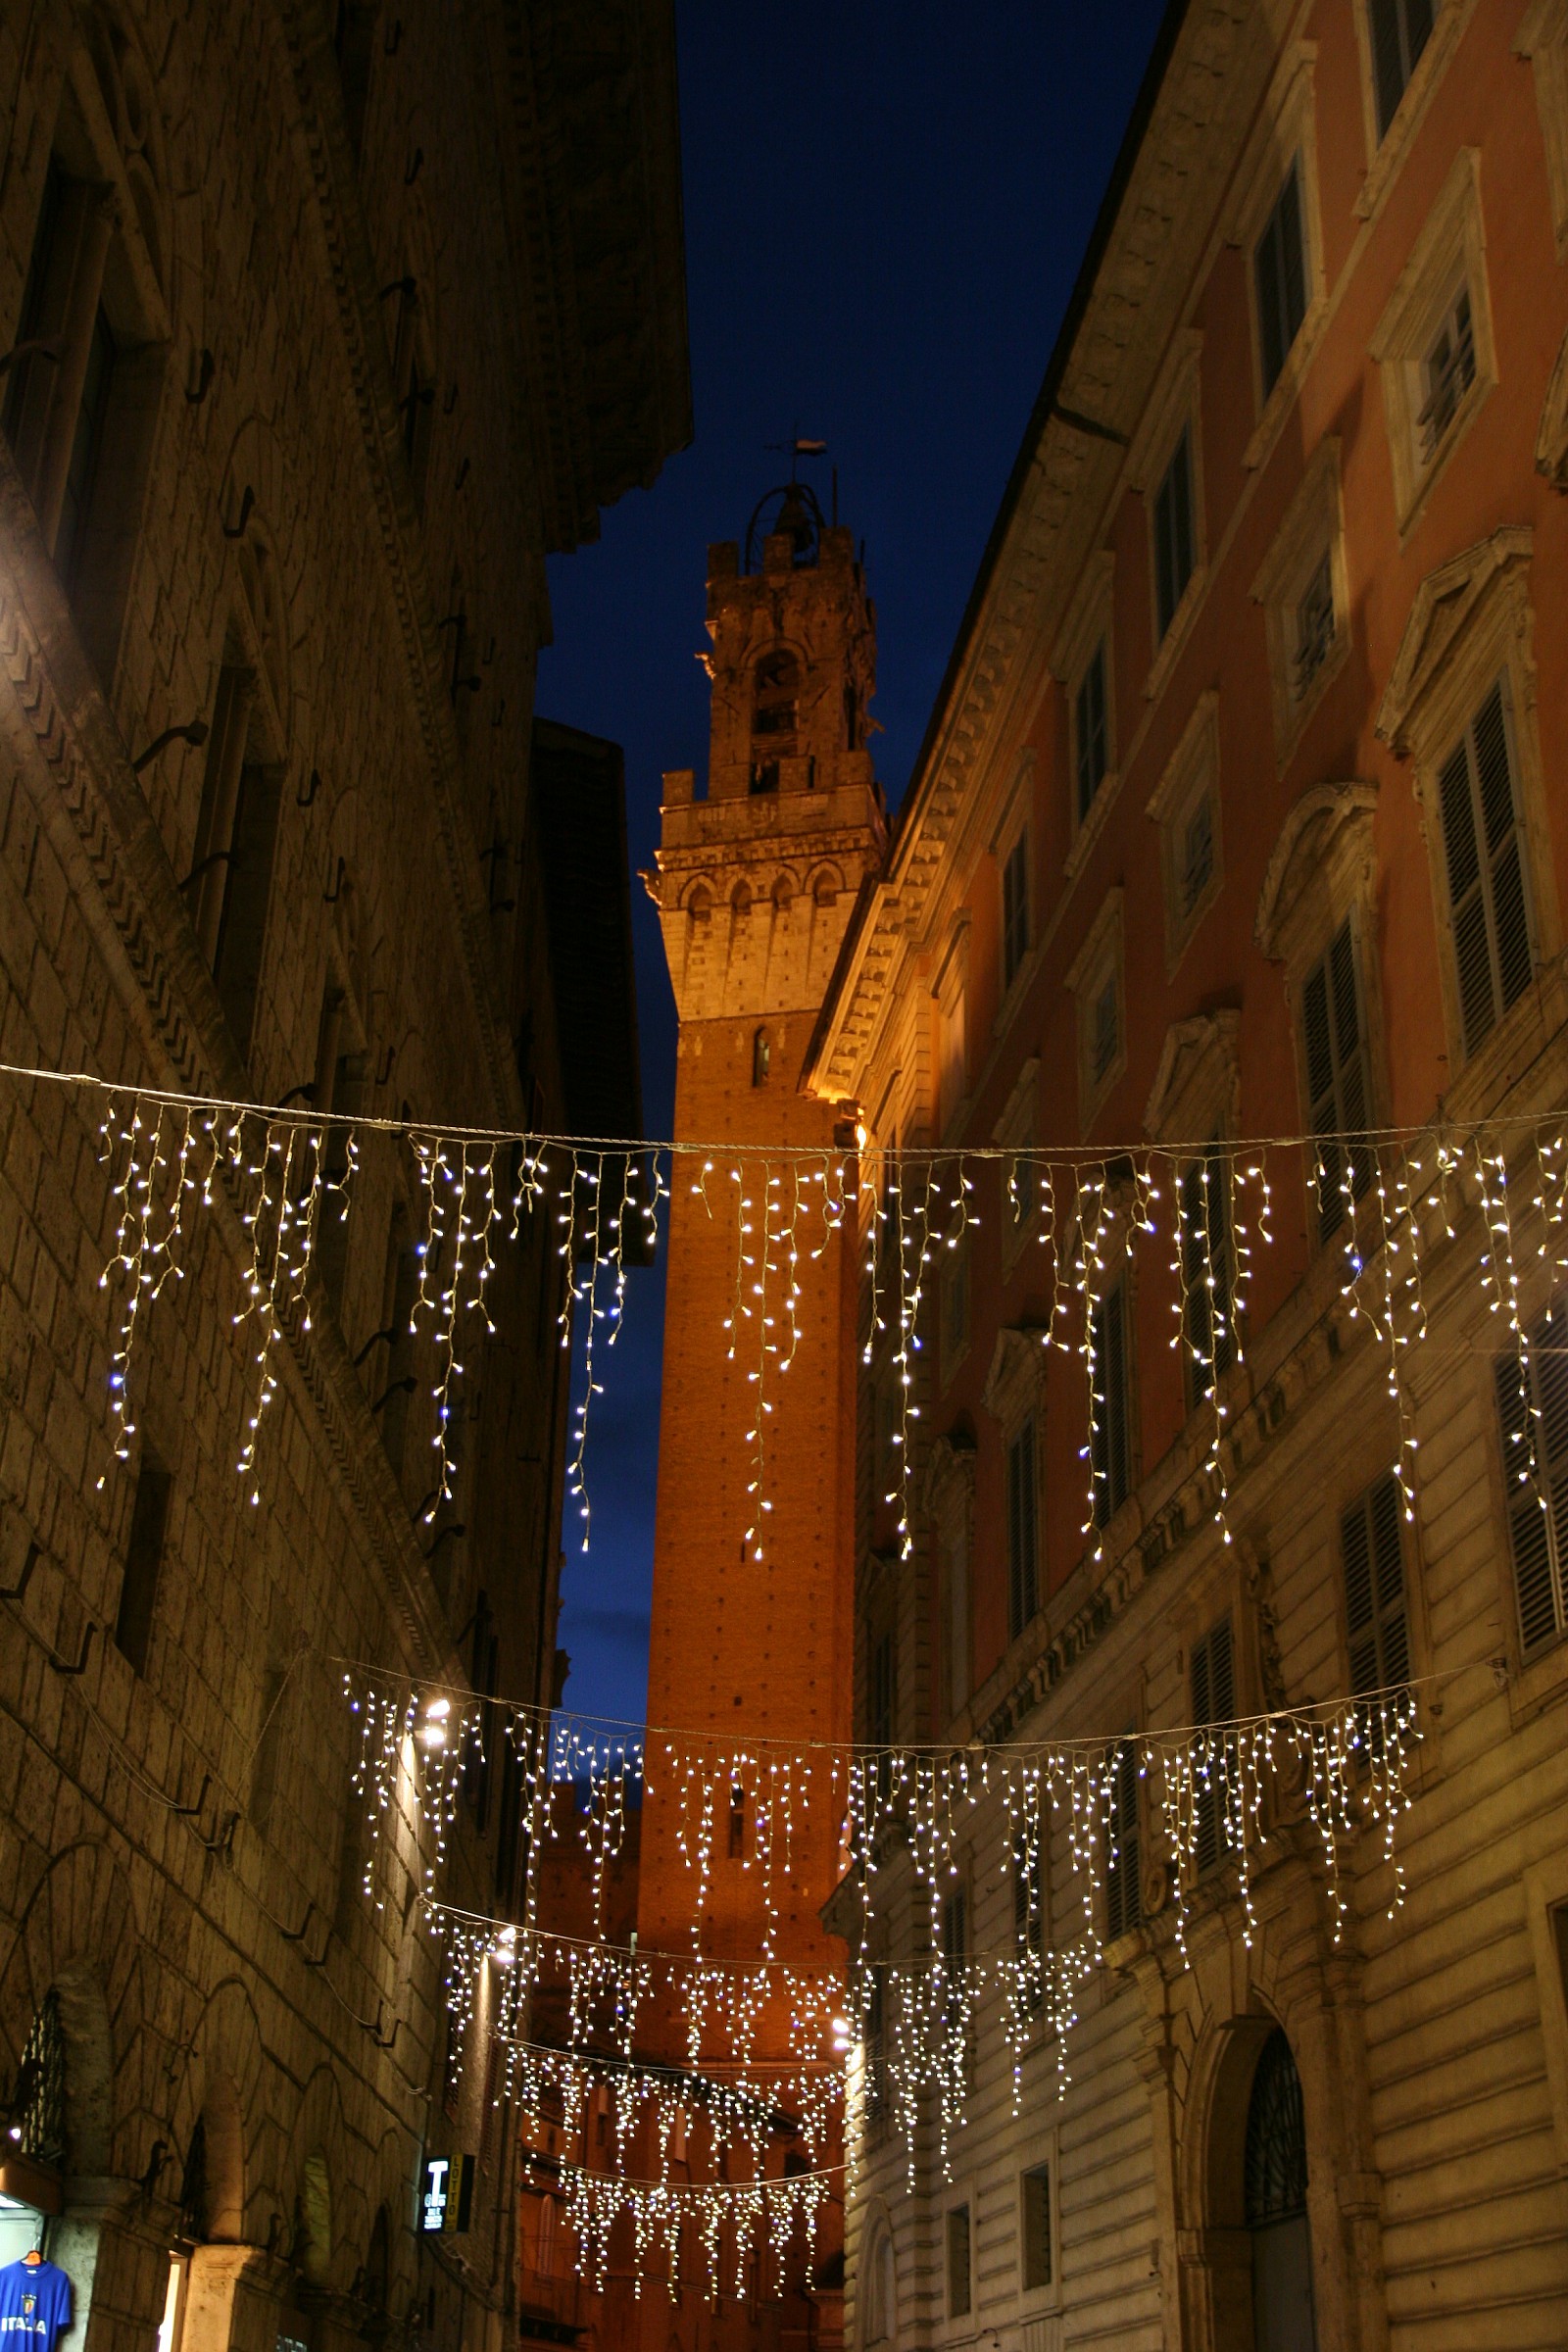 Siena approaching Christmas...